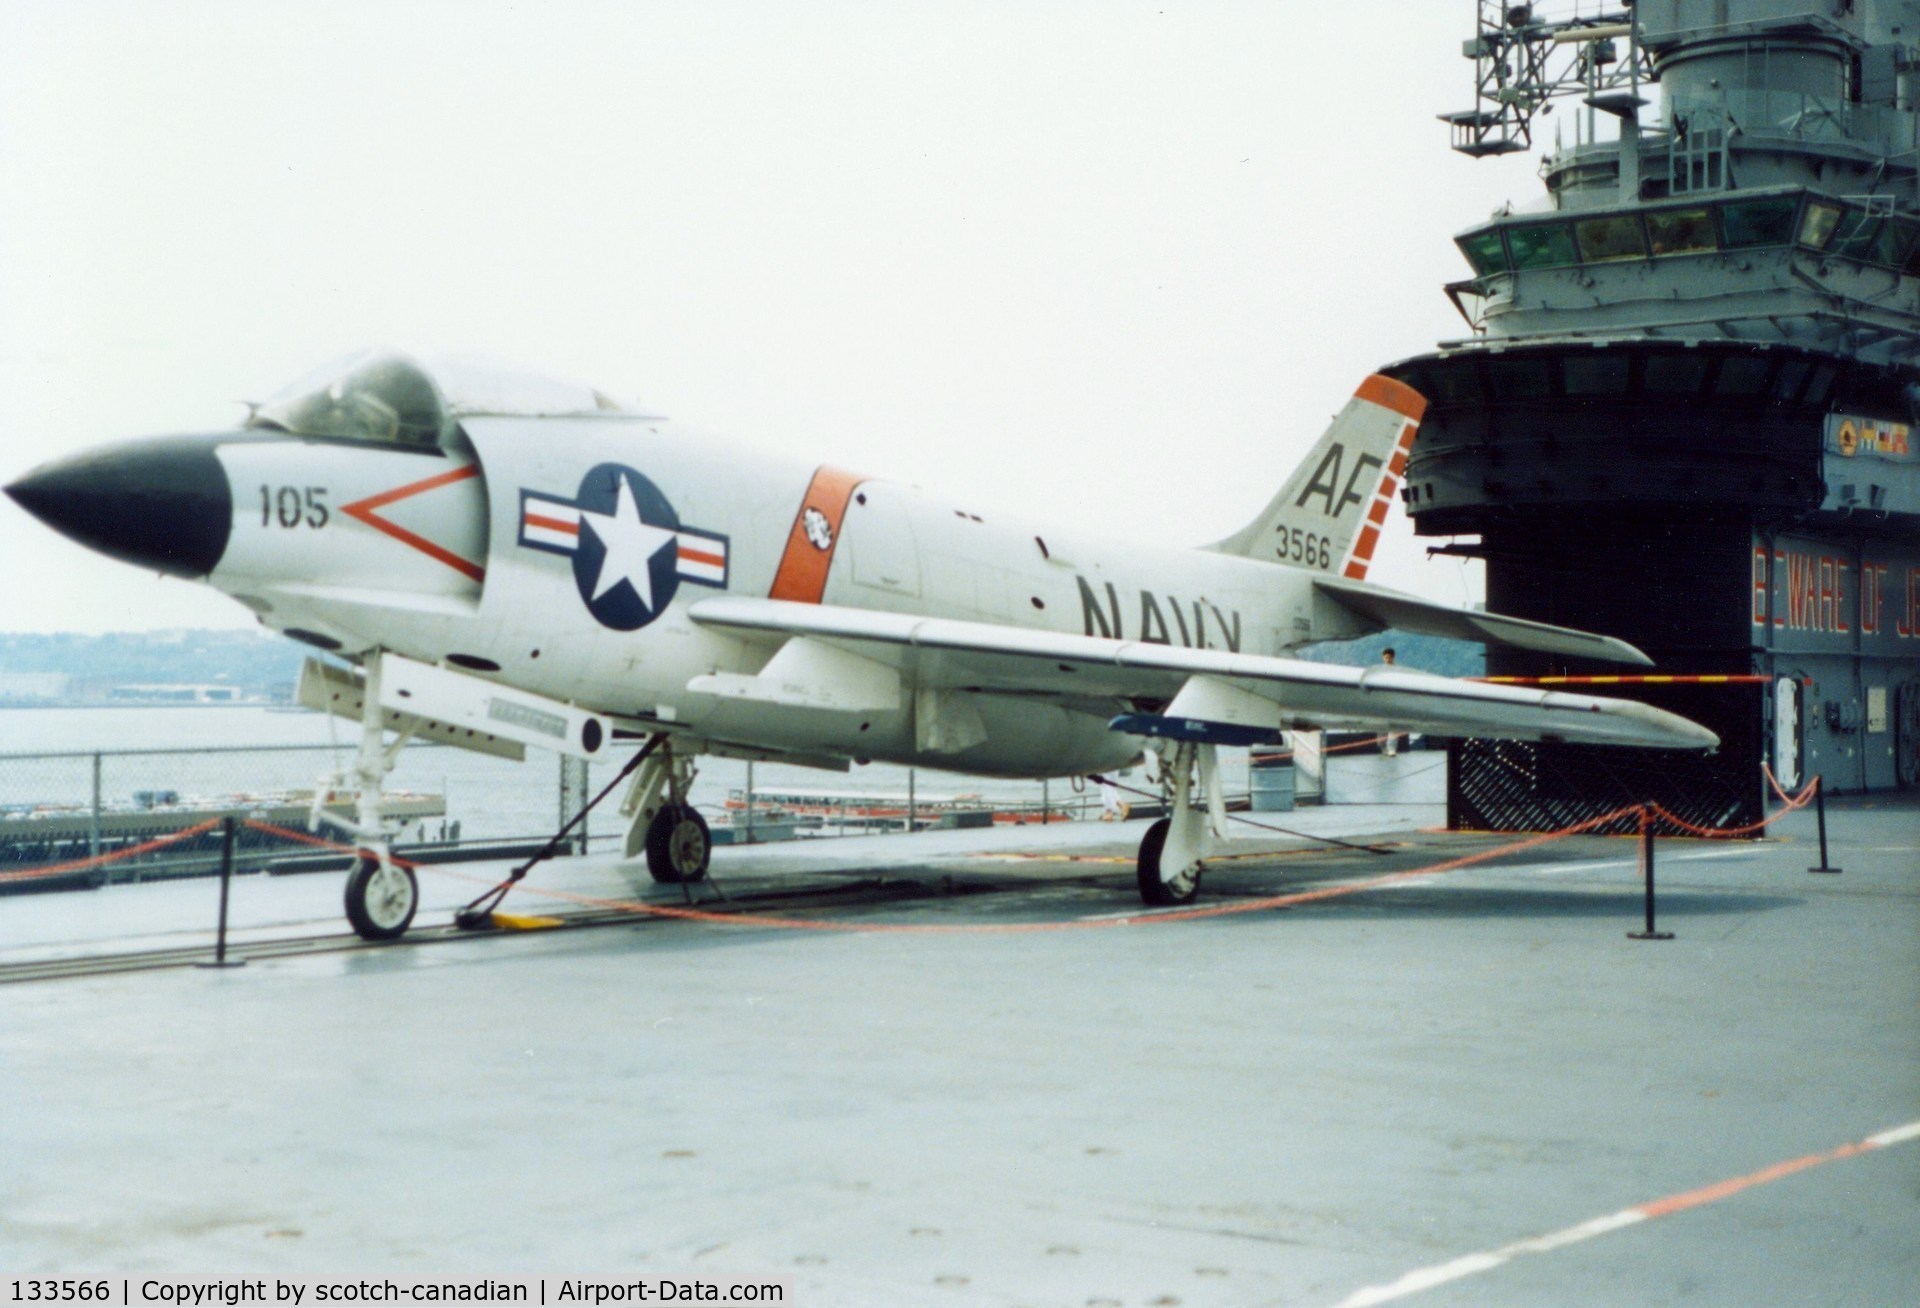 133566, McDonnell F3H-2N Demon C/N 78, McDonnell F3H-2N Demon S/N 133566 at the Intrepid Sea-Air-Space Museum, New York City, NY - circa early 1990's